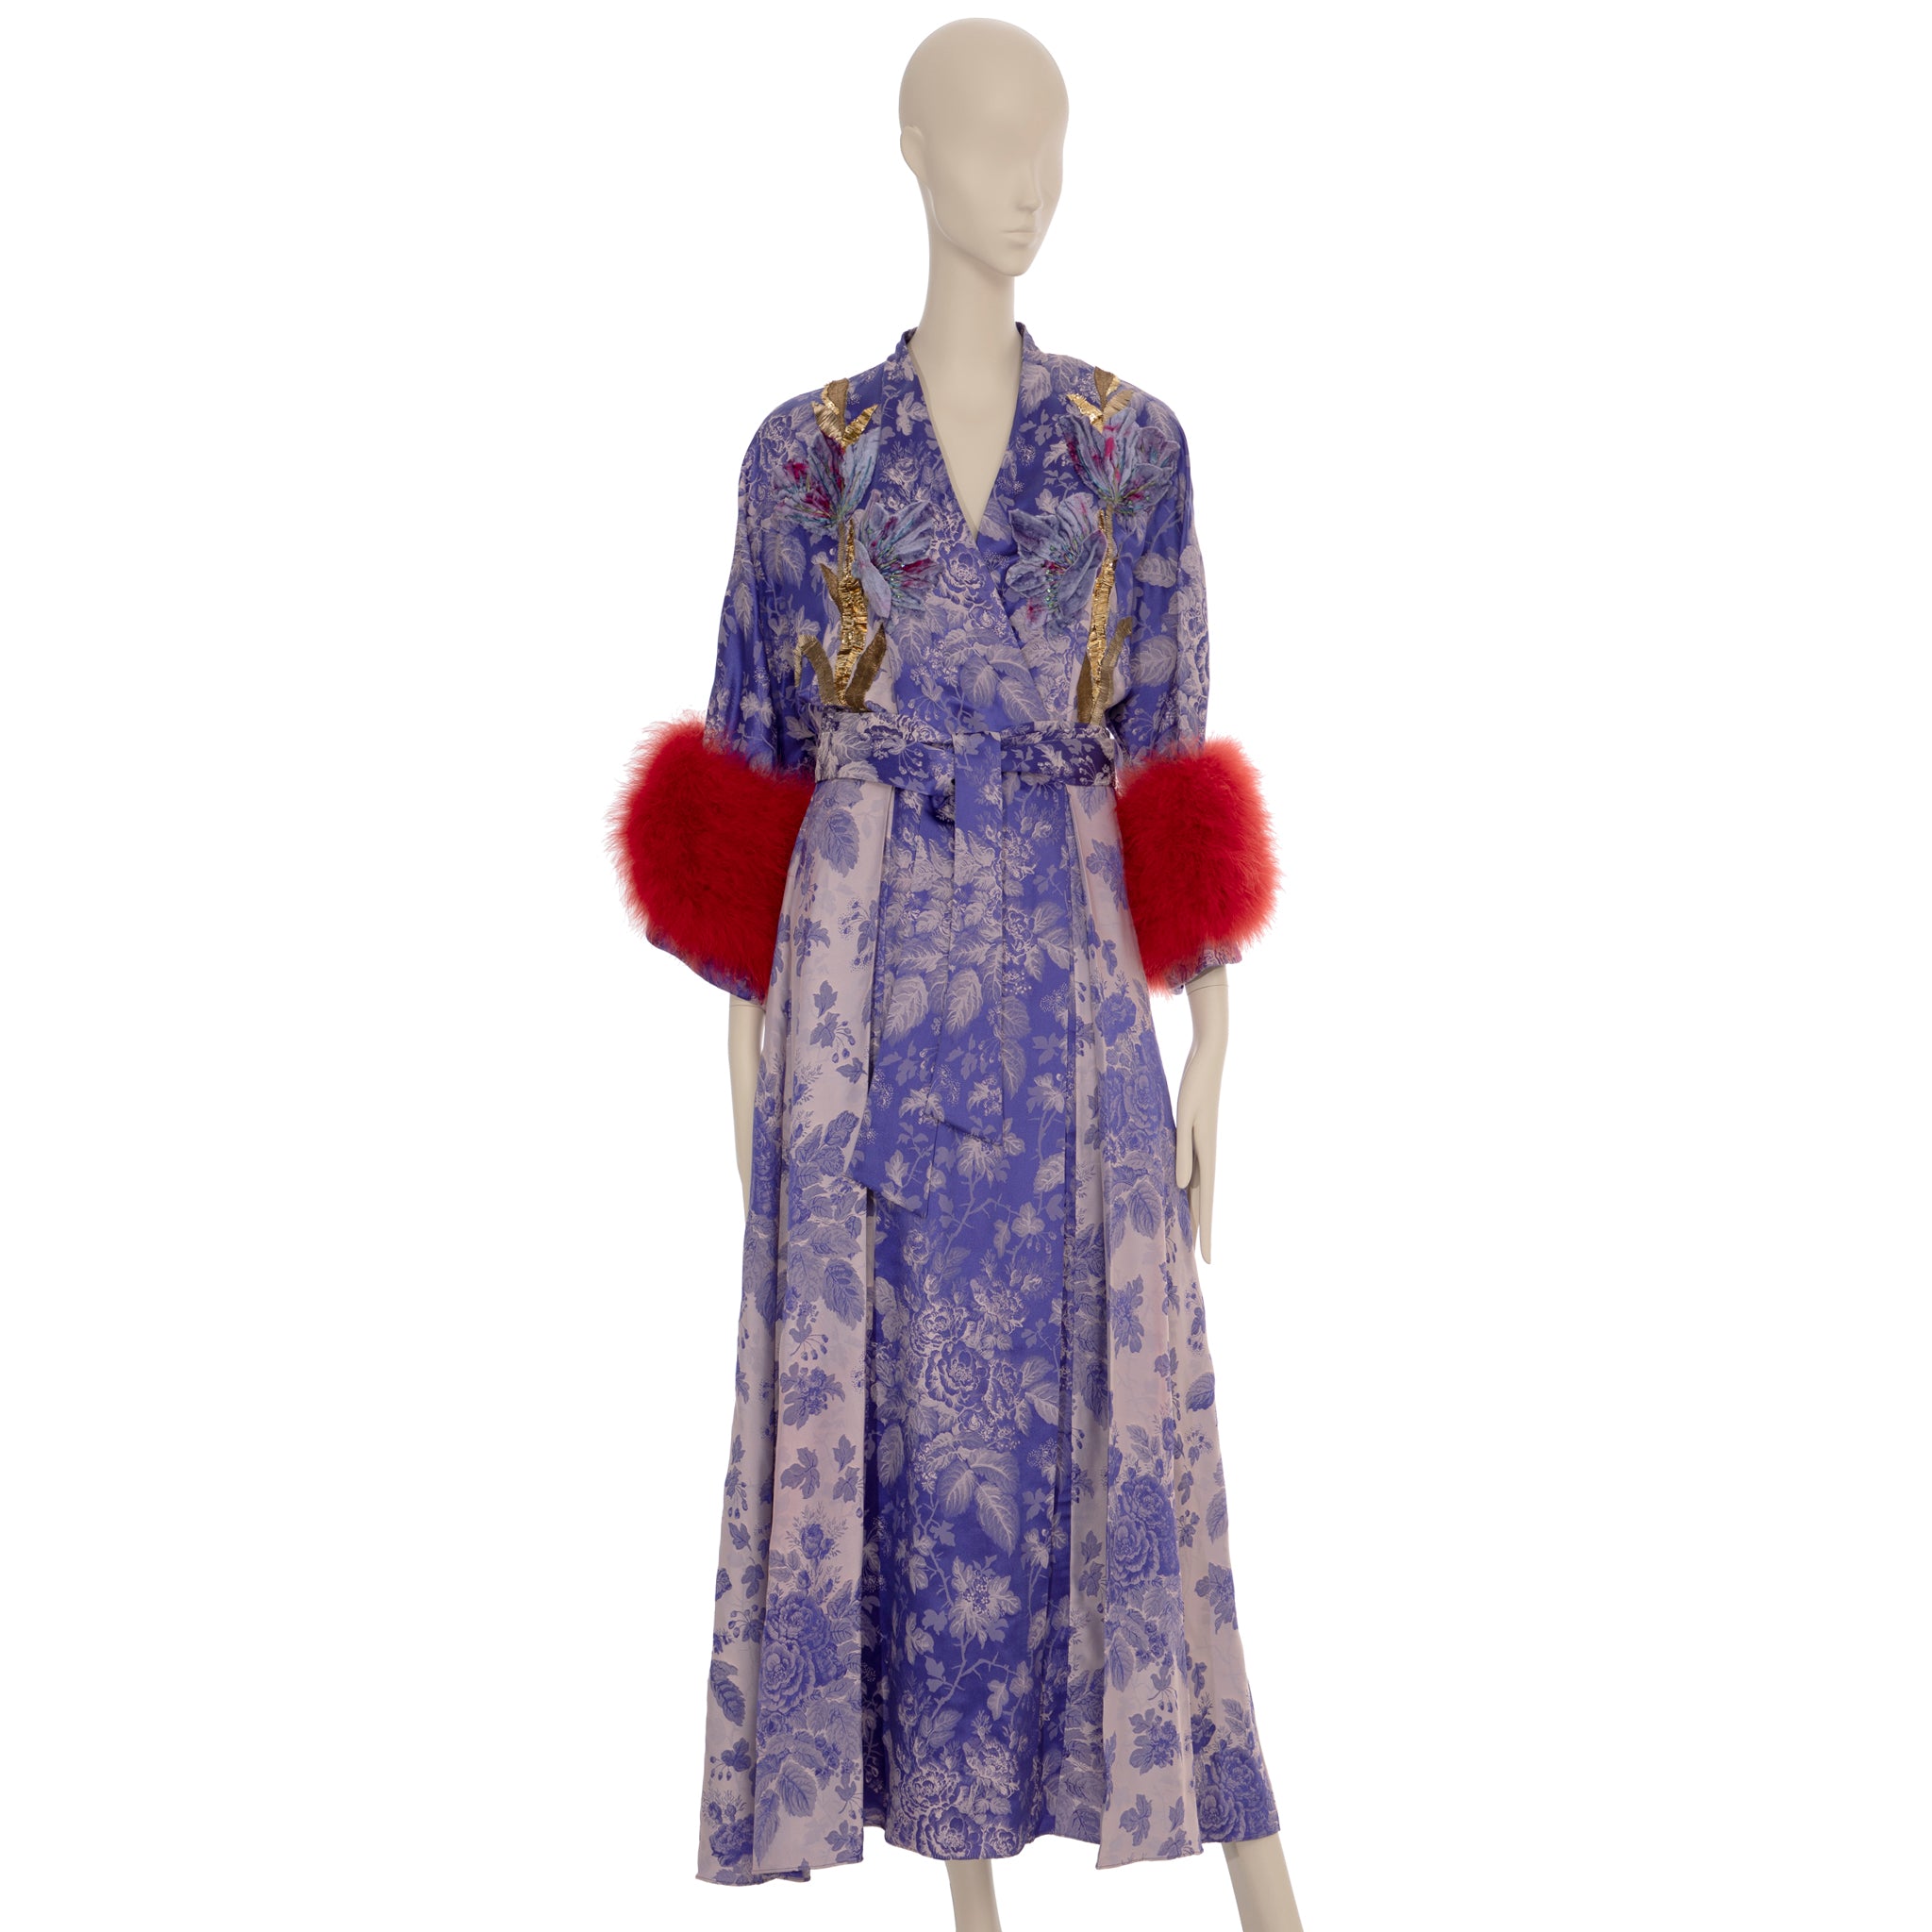 Gucci Floral Jacquard Wrap Dress With Ostrich Feathers 38 IT